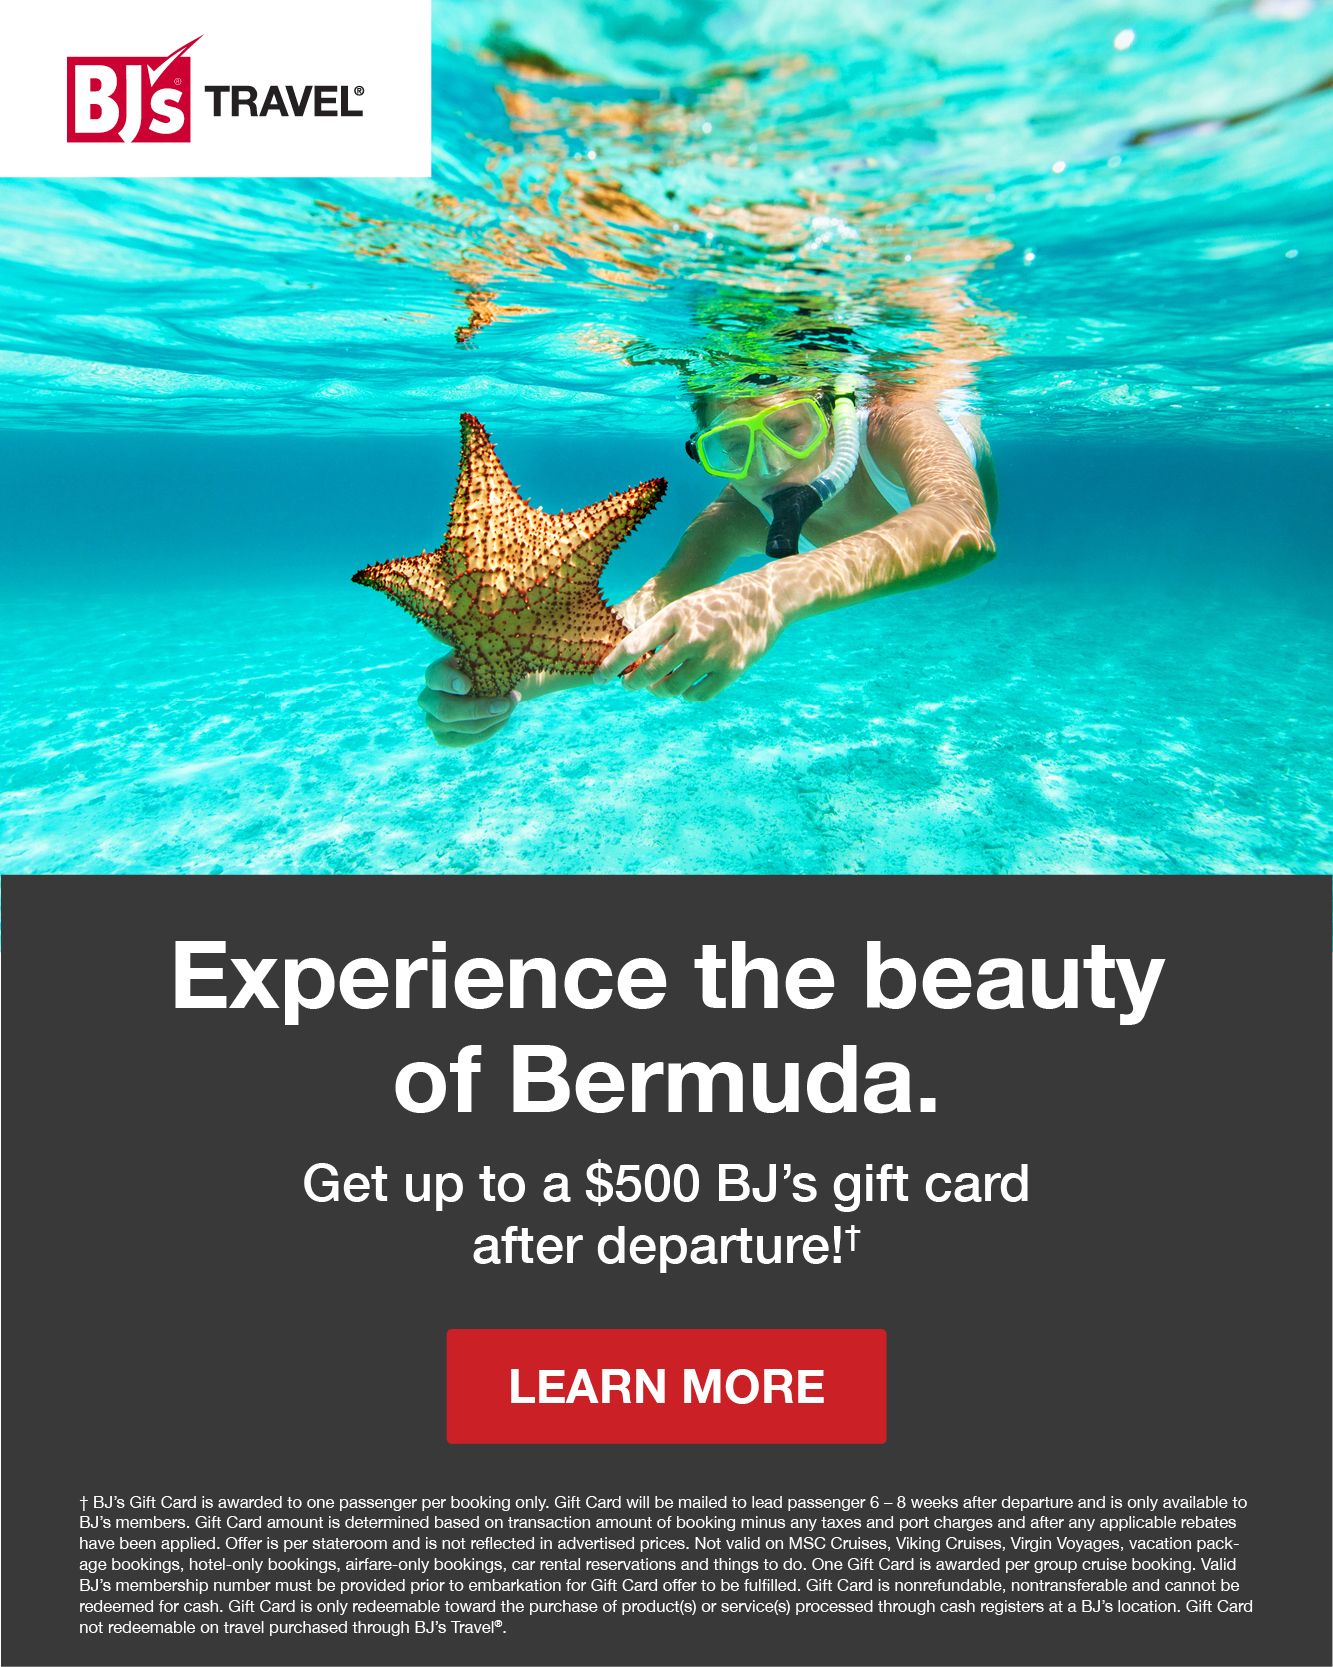 Experience the beauty of Bermuda. Get up to a $500 BJ's gift card after departure!†. Click to learn more